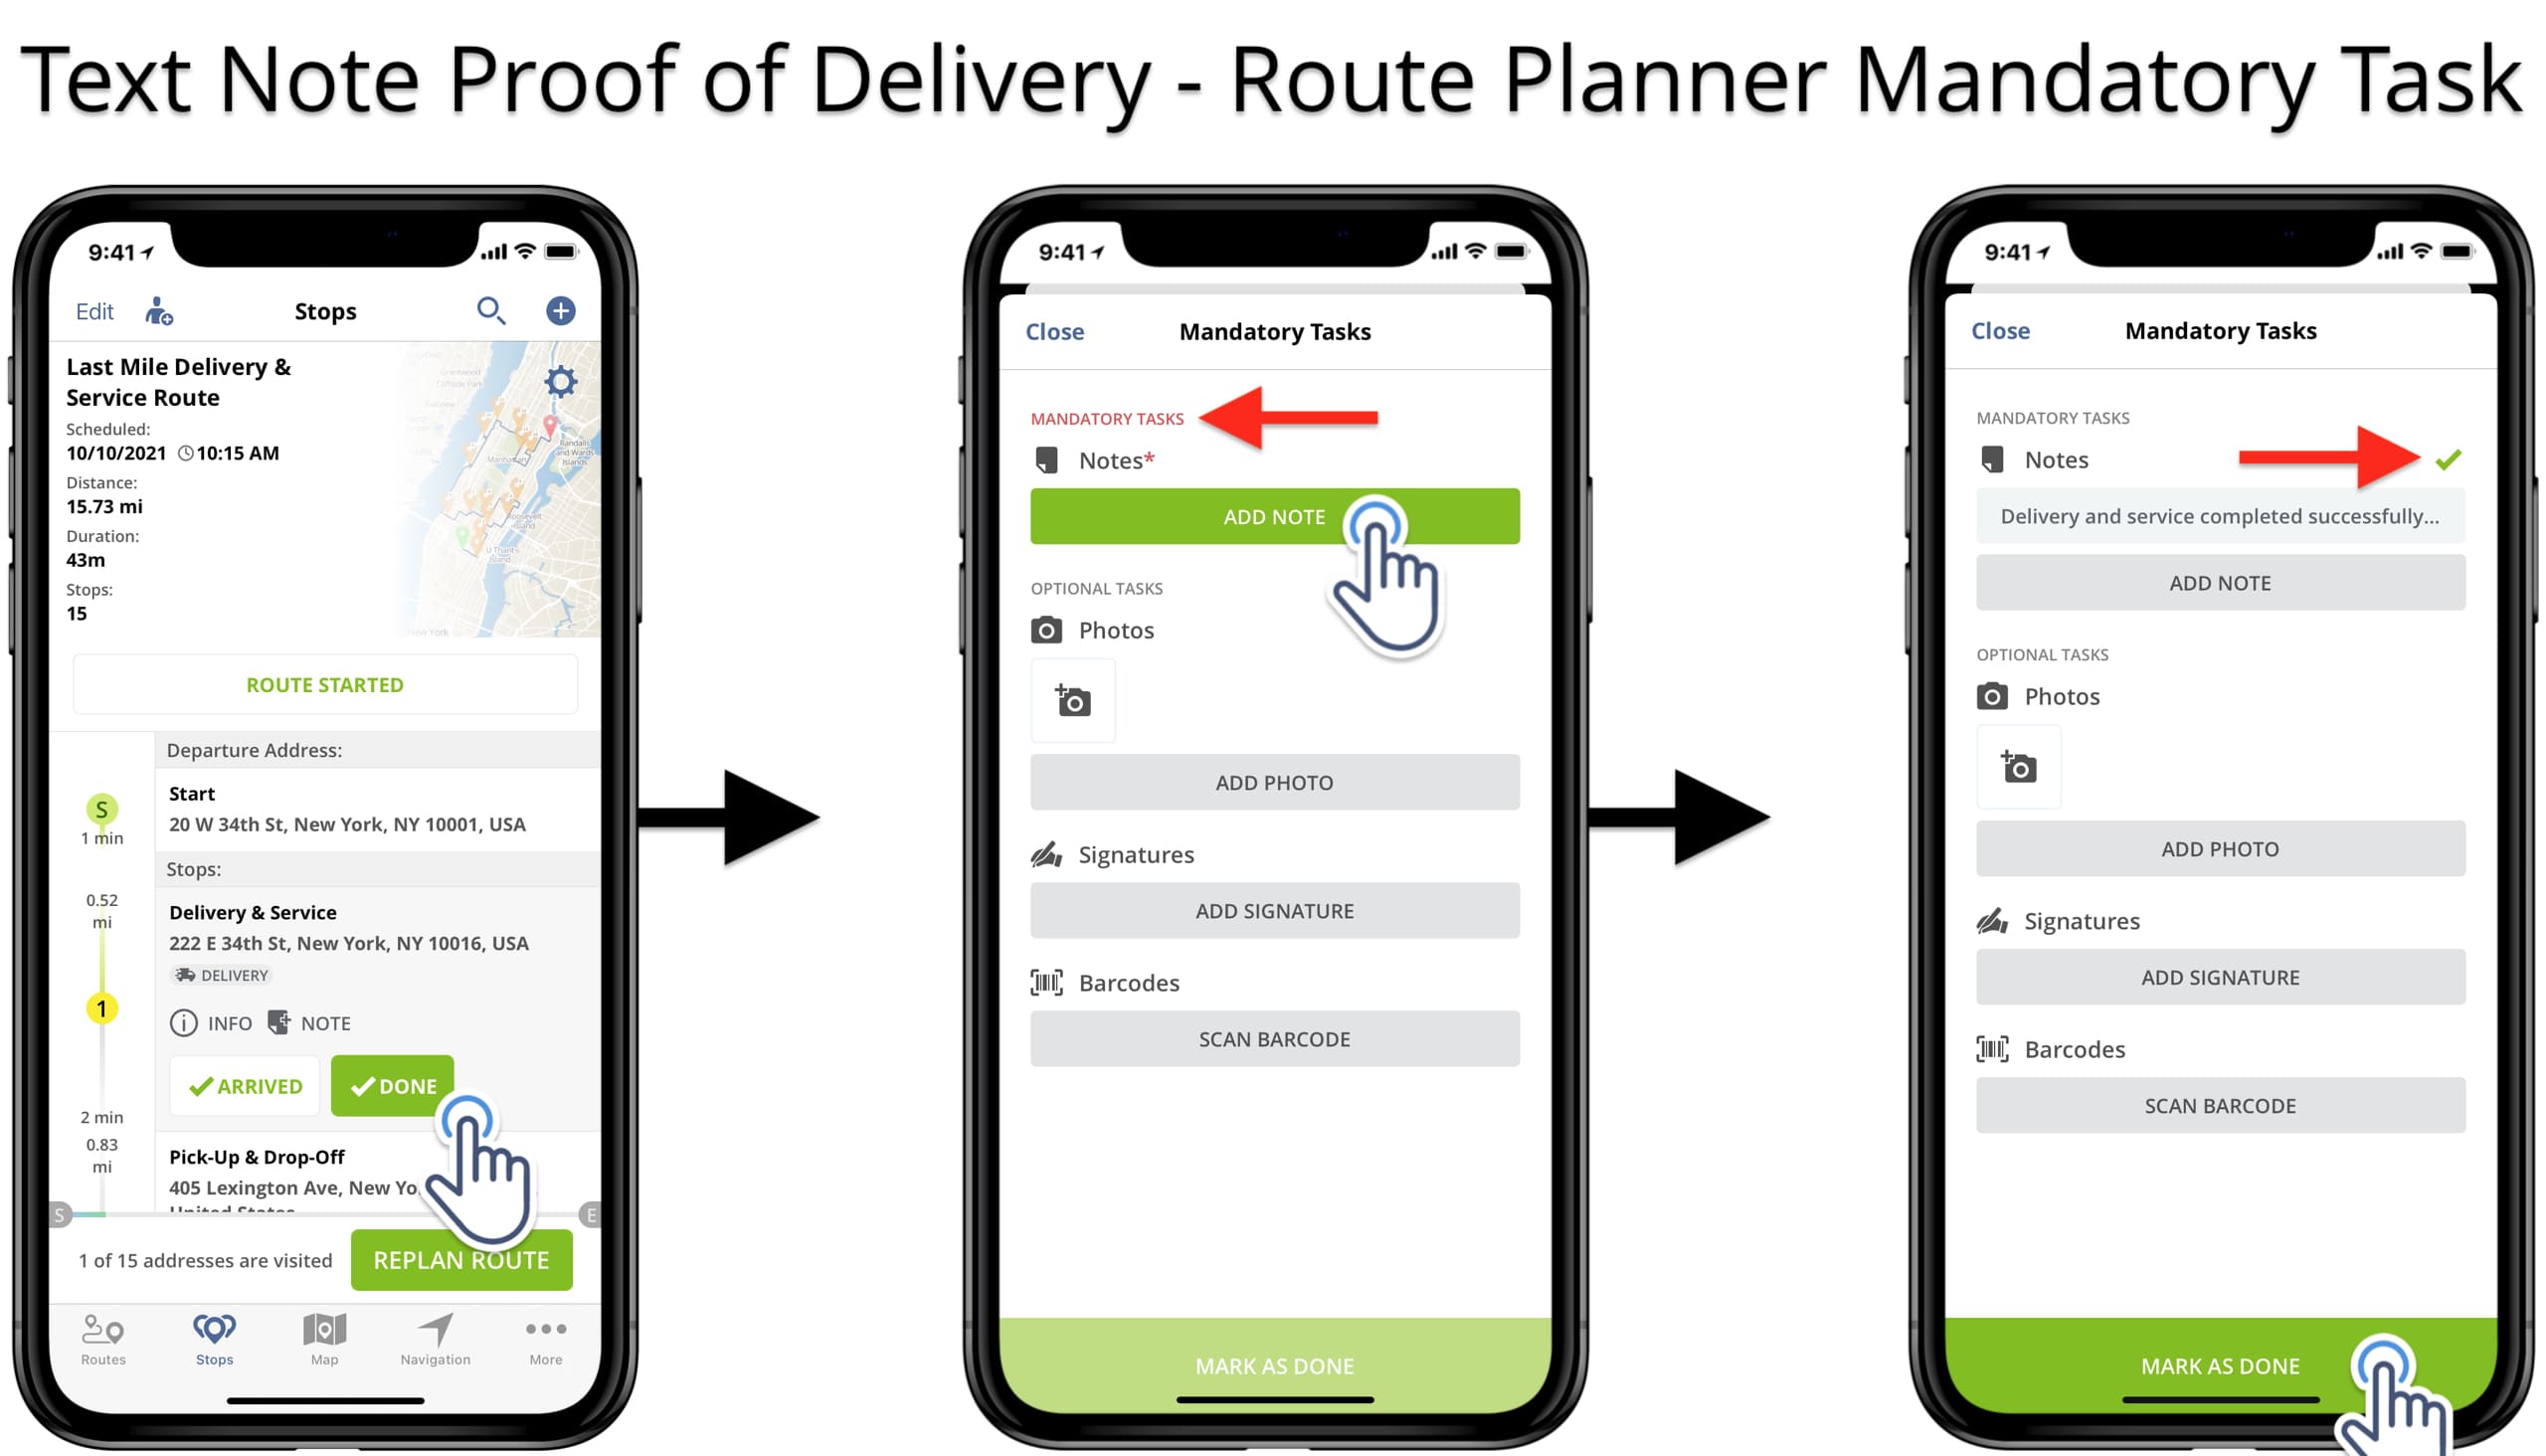 Attaching text notes to route stops as proof of delivery or proof of service.